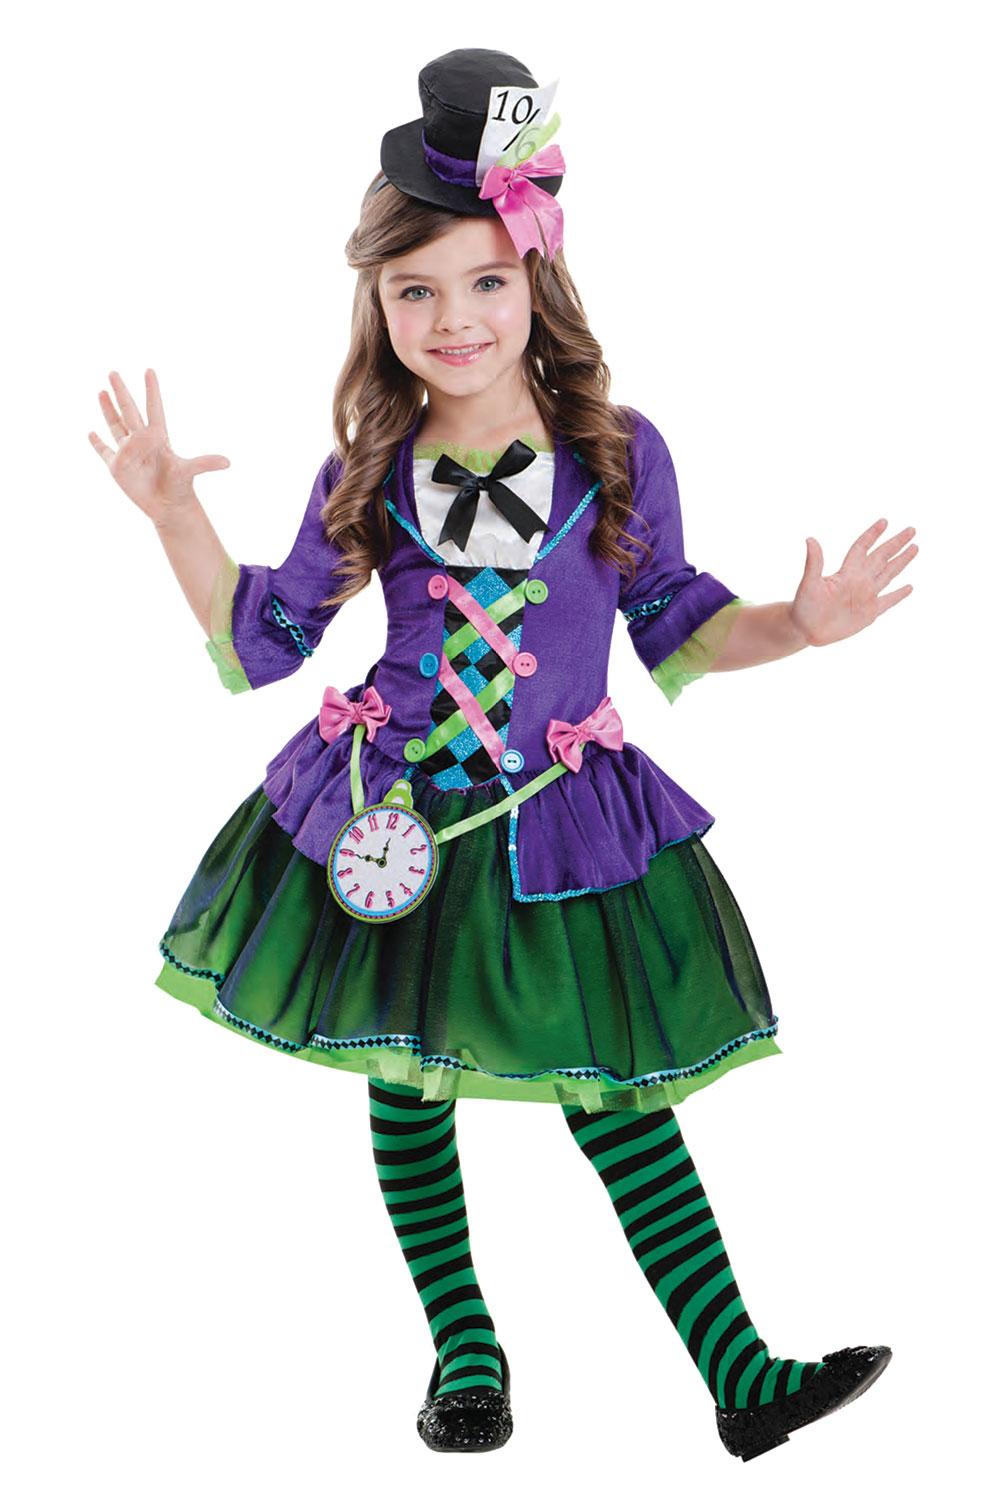 Bad Hatter Fancy Dress Costume for Girls in sizes small to XL by Amscan 9903193 available here at Karnival Costumes online party shop